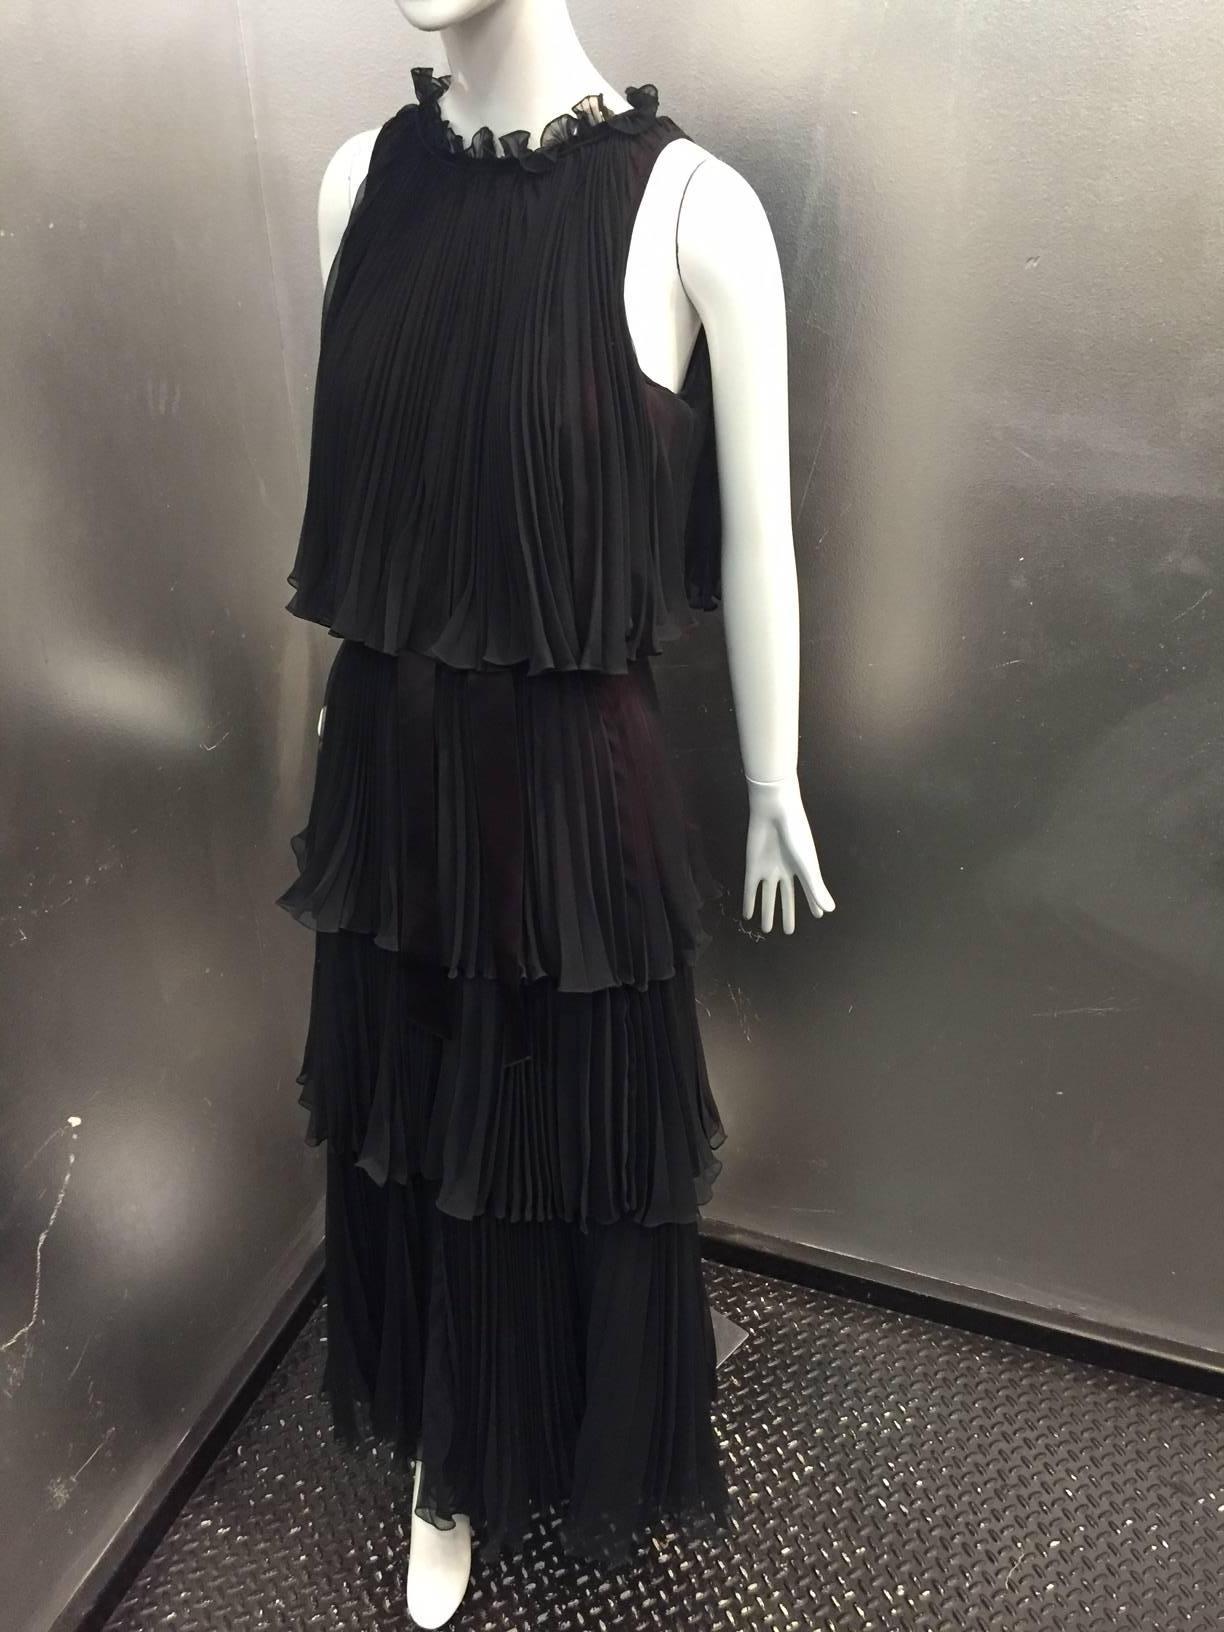 A lovely, graceful 1970s Jean Varon pleated crepe chiffon evening gown with 4 tiers.  Completely lined in a plum color acetate.  Zippered back with a small tie at top. Small ruffle at neckline. 